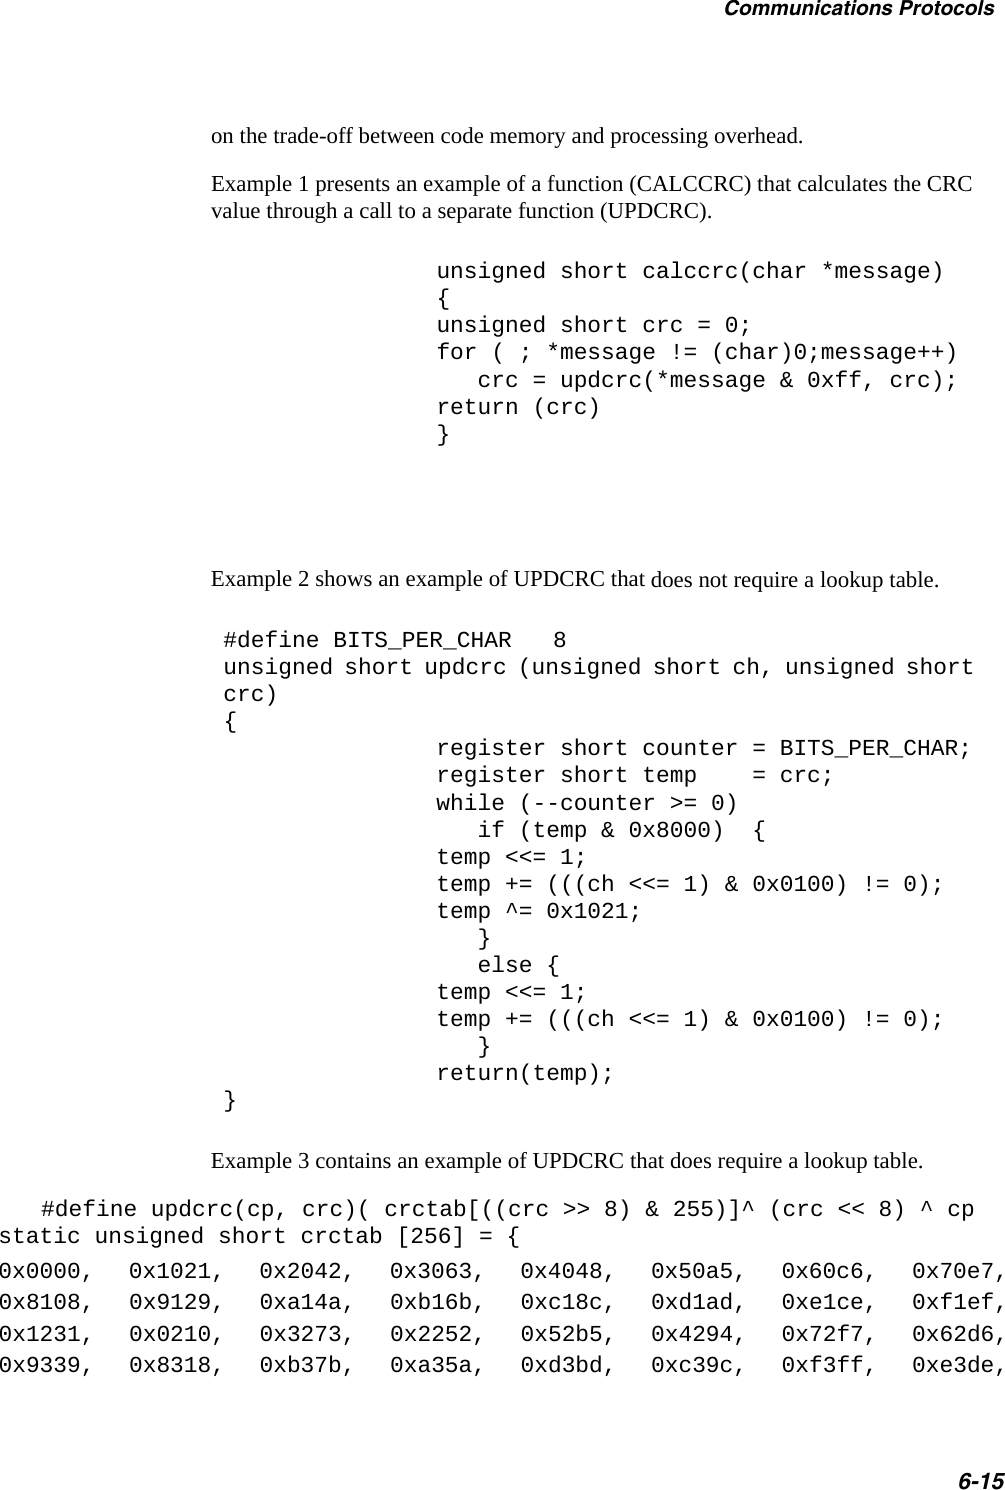 Communications Protocols6-15on the trade-off between code memory and processing overhead.Example 1 presents an example of a function (CALCCRC) that calculates the CRC value through a call to a separate function (UPDCRC).unsigned short calccrc(char *message){unsigned short crc = 0;for ( ; *message != (char)0;message++)   crc = updcrc(*message &amp; 0xff, crc);return (crc)}Example 2 shows an example of UPDCRC that does not require a lookup table.#define BITS_PER_CHAR   8unsigned short updcrc (unsigned short ch, unsigned short crc){register short counter = BITS_PER_CHAR;register short temp    = crc;while (--counter &gt;= 0)   if (temp &amp; 0x8000)  {temp &lt;&lt;= 1;temp += (((ch &lt;&lt;= 1) &amp; 0x0100) != 0);temp ^= 0x1021;   }   else {temp &lt;&lt;= 1;temp += (((ch &lt;&lt;= 1) &amp; 0x0100) != 0);   }return(temp);}Example 3 contains an example of UPDCRC that does require a lookup table. #define updcrc(cp, crc)( crctab[((crc &gt;&gt; 8) &amp; 255)]^ (crc &lt;&lt; 8) ^ cpstatic unsigned short crctab [256] = {0x0000, 0x1021, 0x2042, 0x3063, 0x4048, 0x50a5, 0x60c6, 0x70e7,0x8108, 0x9129, 0xa14a, 0xb16b, 0xc18c, 0xd1ad, 0xe1ce, 0xf1ef,0x1231, 0x0210, 0x3273, 0x2252, 0x52b5, 0x4294, 0x72f7, 0x62d6,0x9339, 0x8318, 0xb37b, 0xa35a, 0xd3bd, 0xc39c, 0xf3ff, 0xe3de,